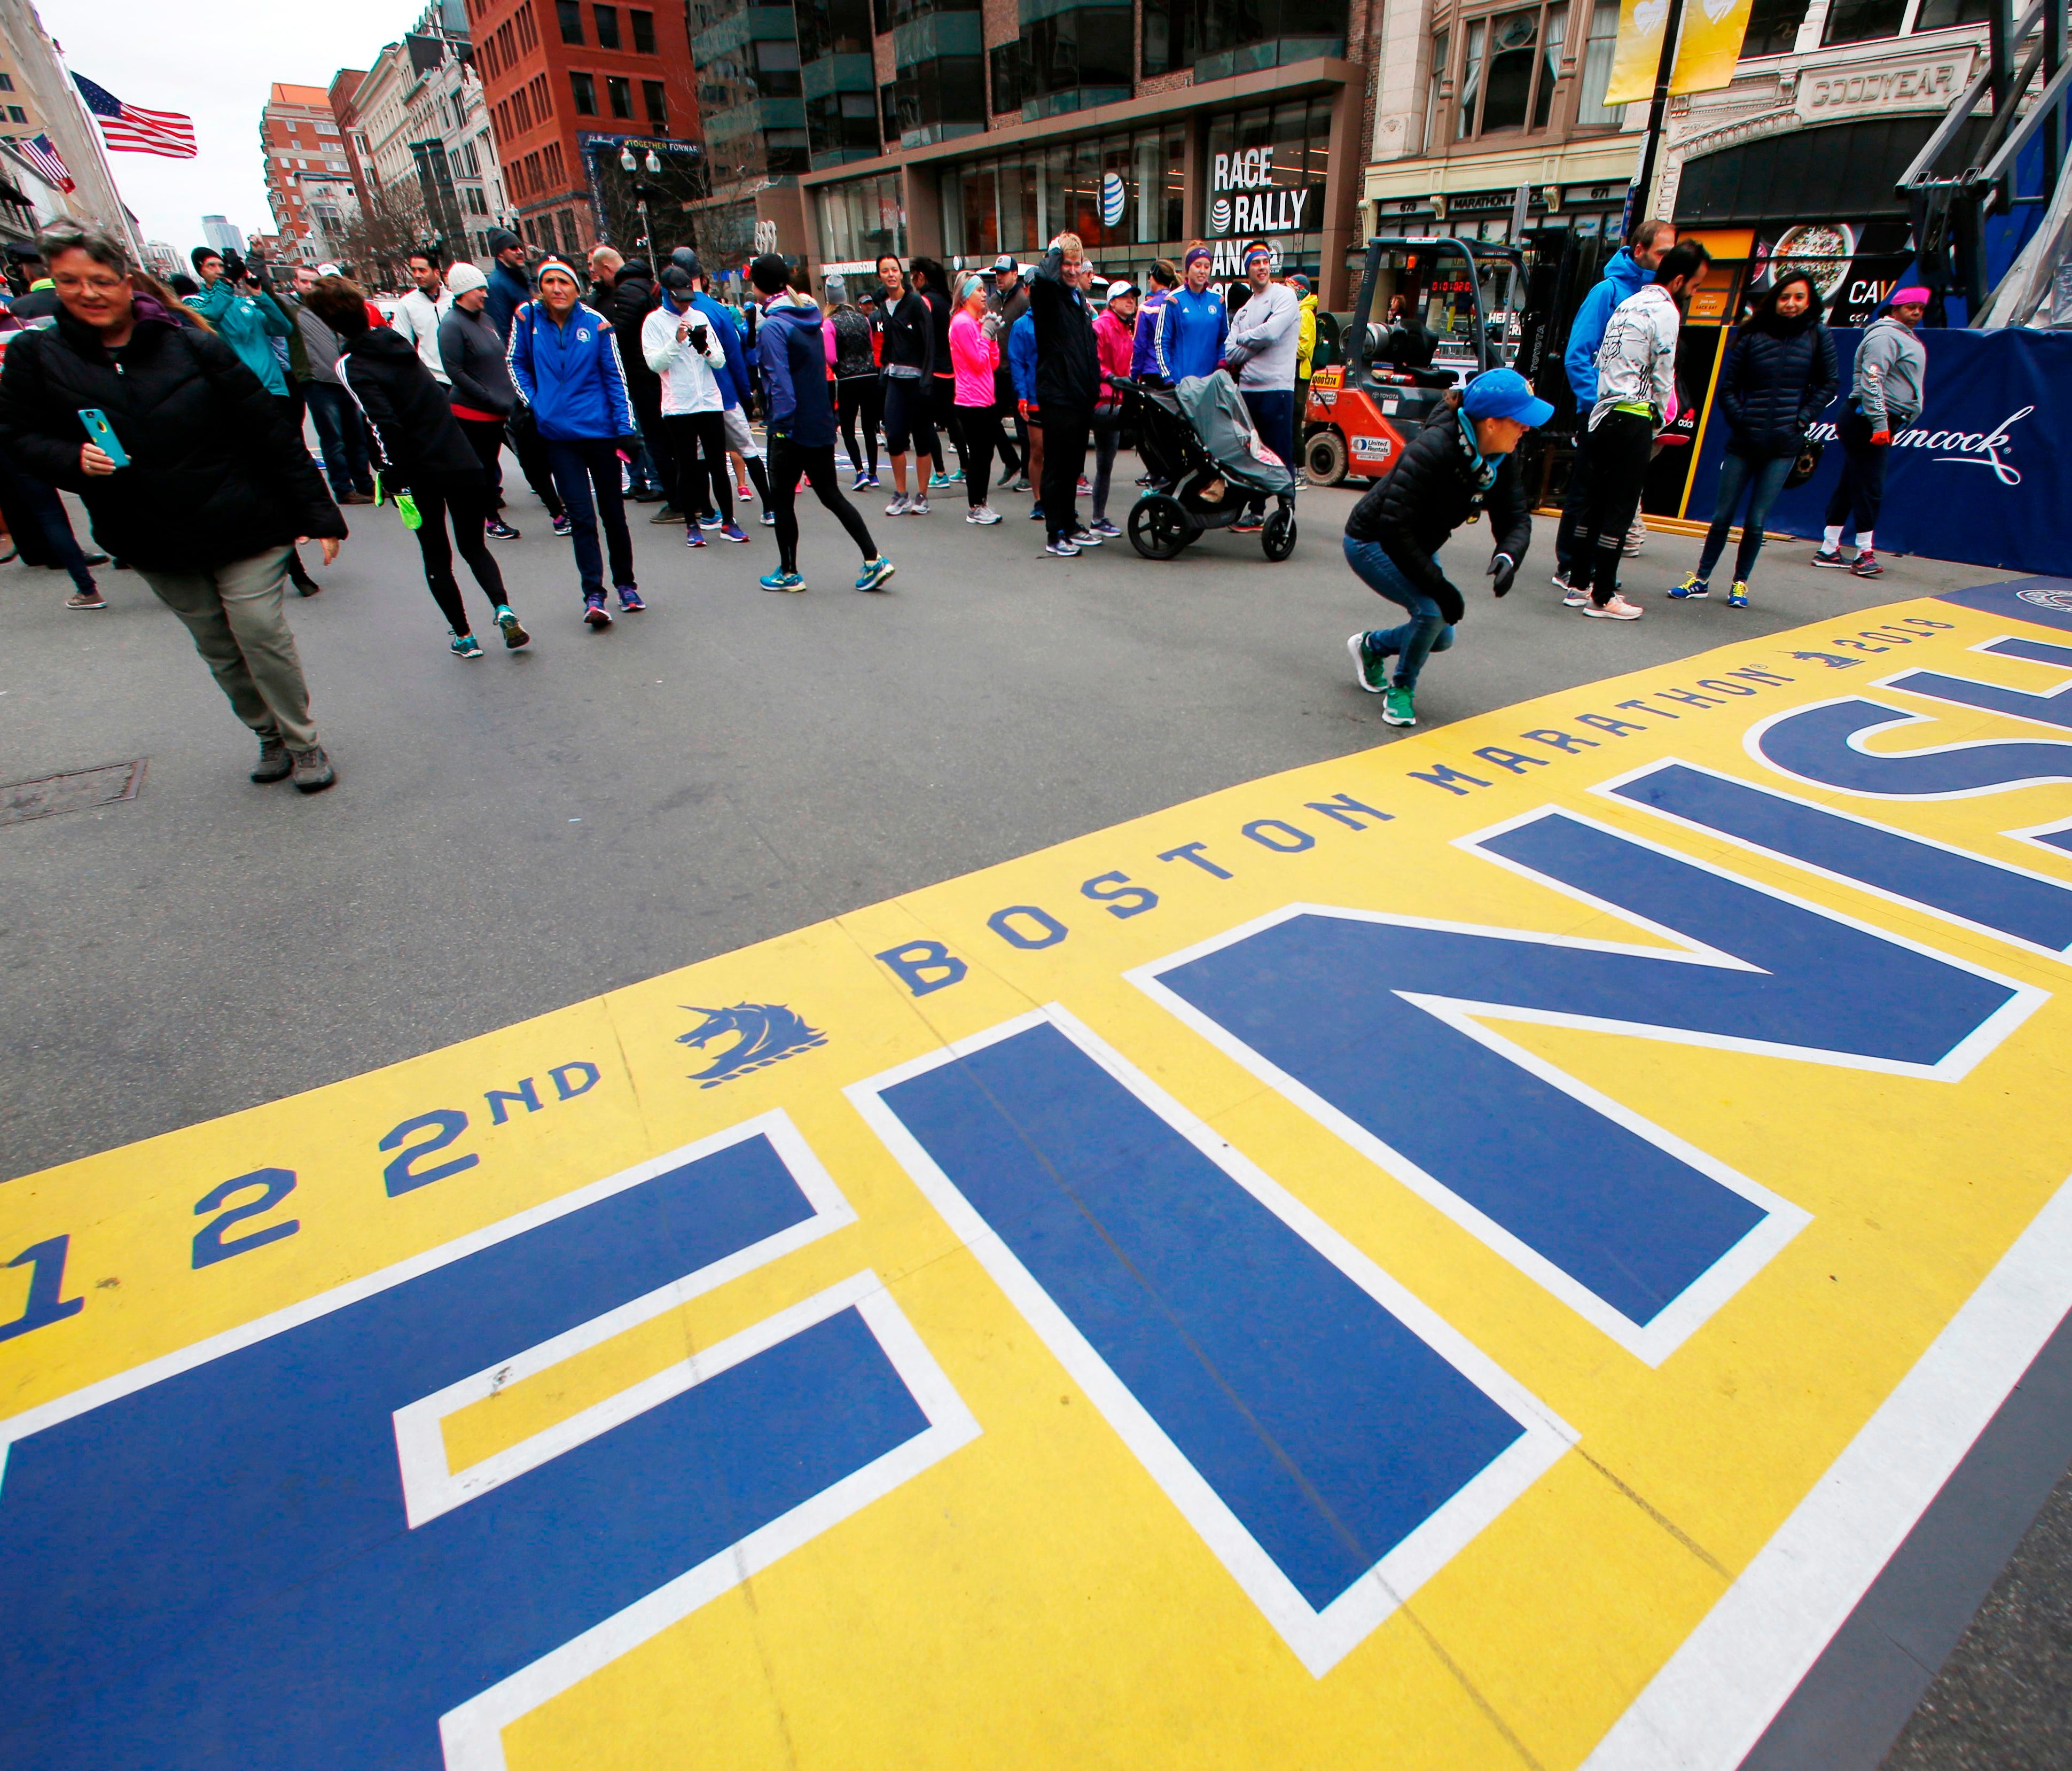 People gather at the Boston Marathon finish line in Boston on April 15 ahead of Monday's race.